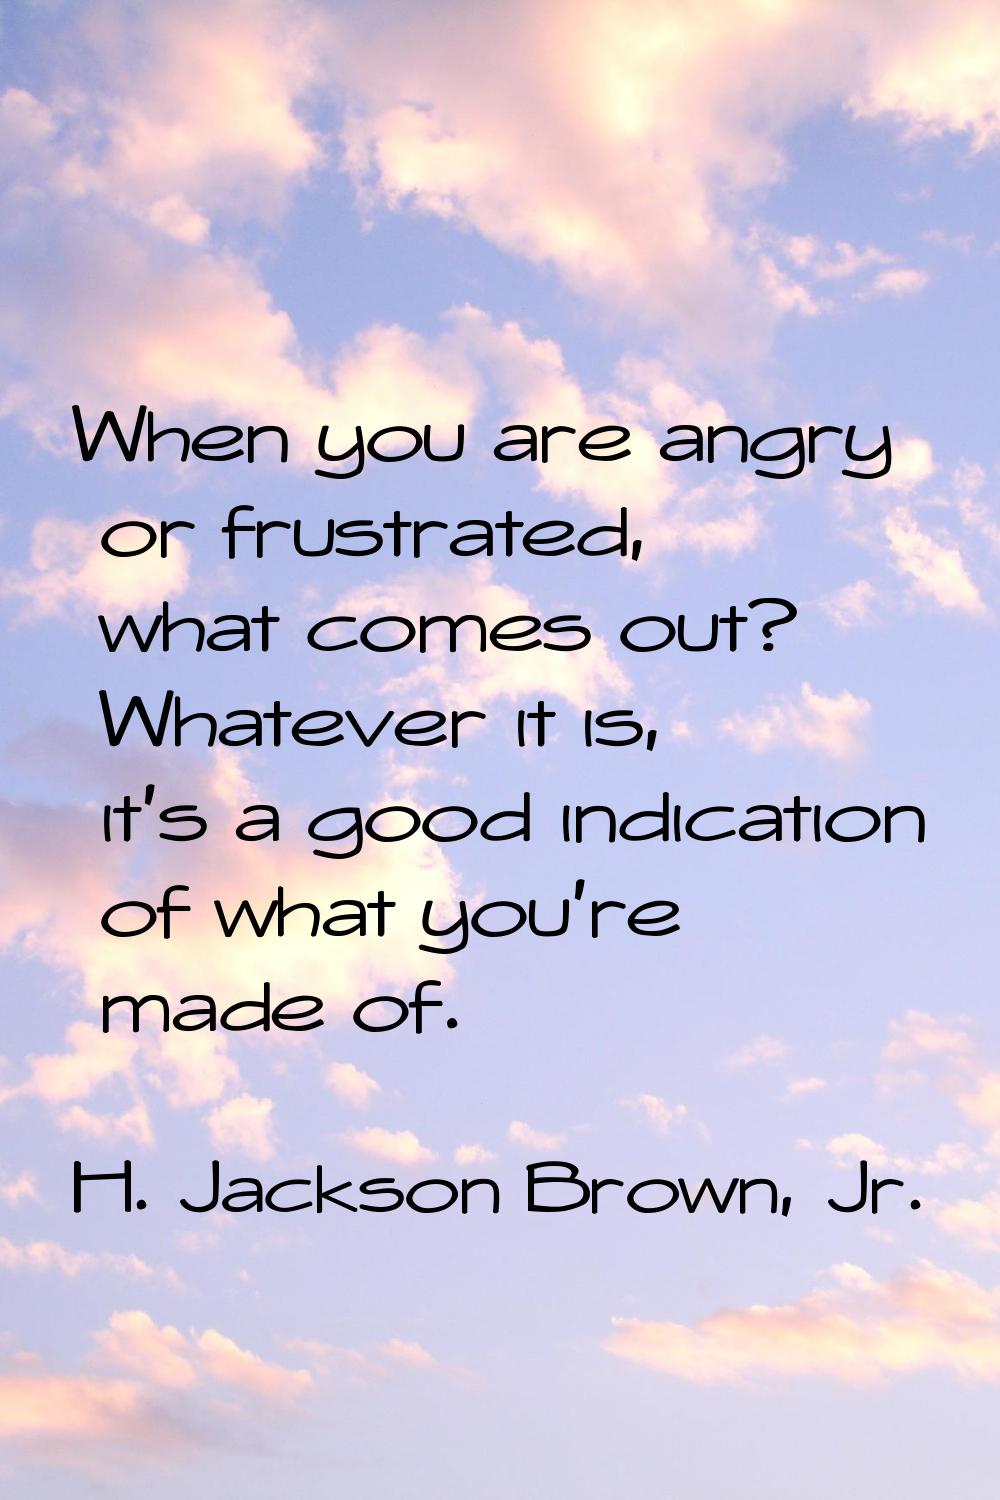 When you are angry or frustrated, what comes out? Whatever it is, it's a good indication of what yo